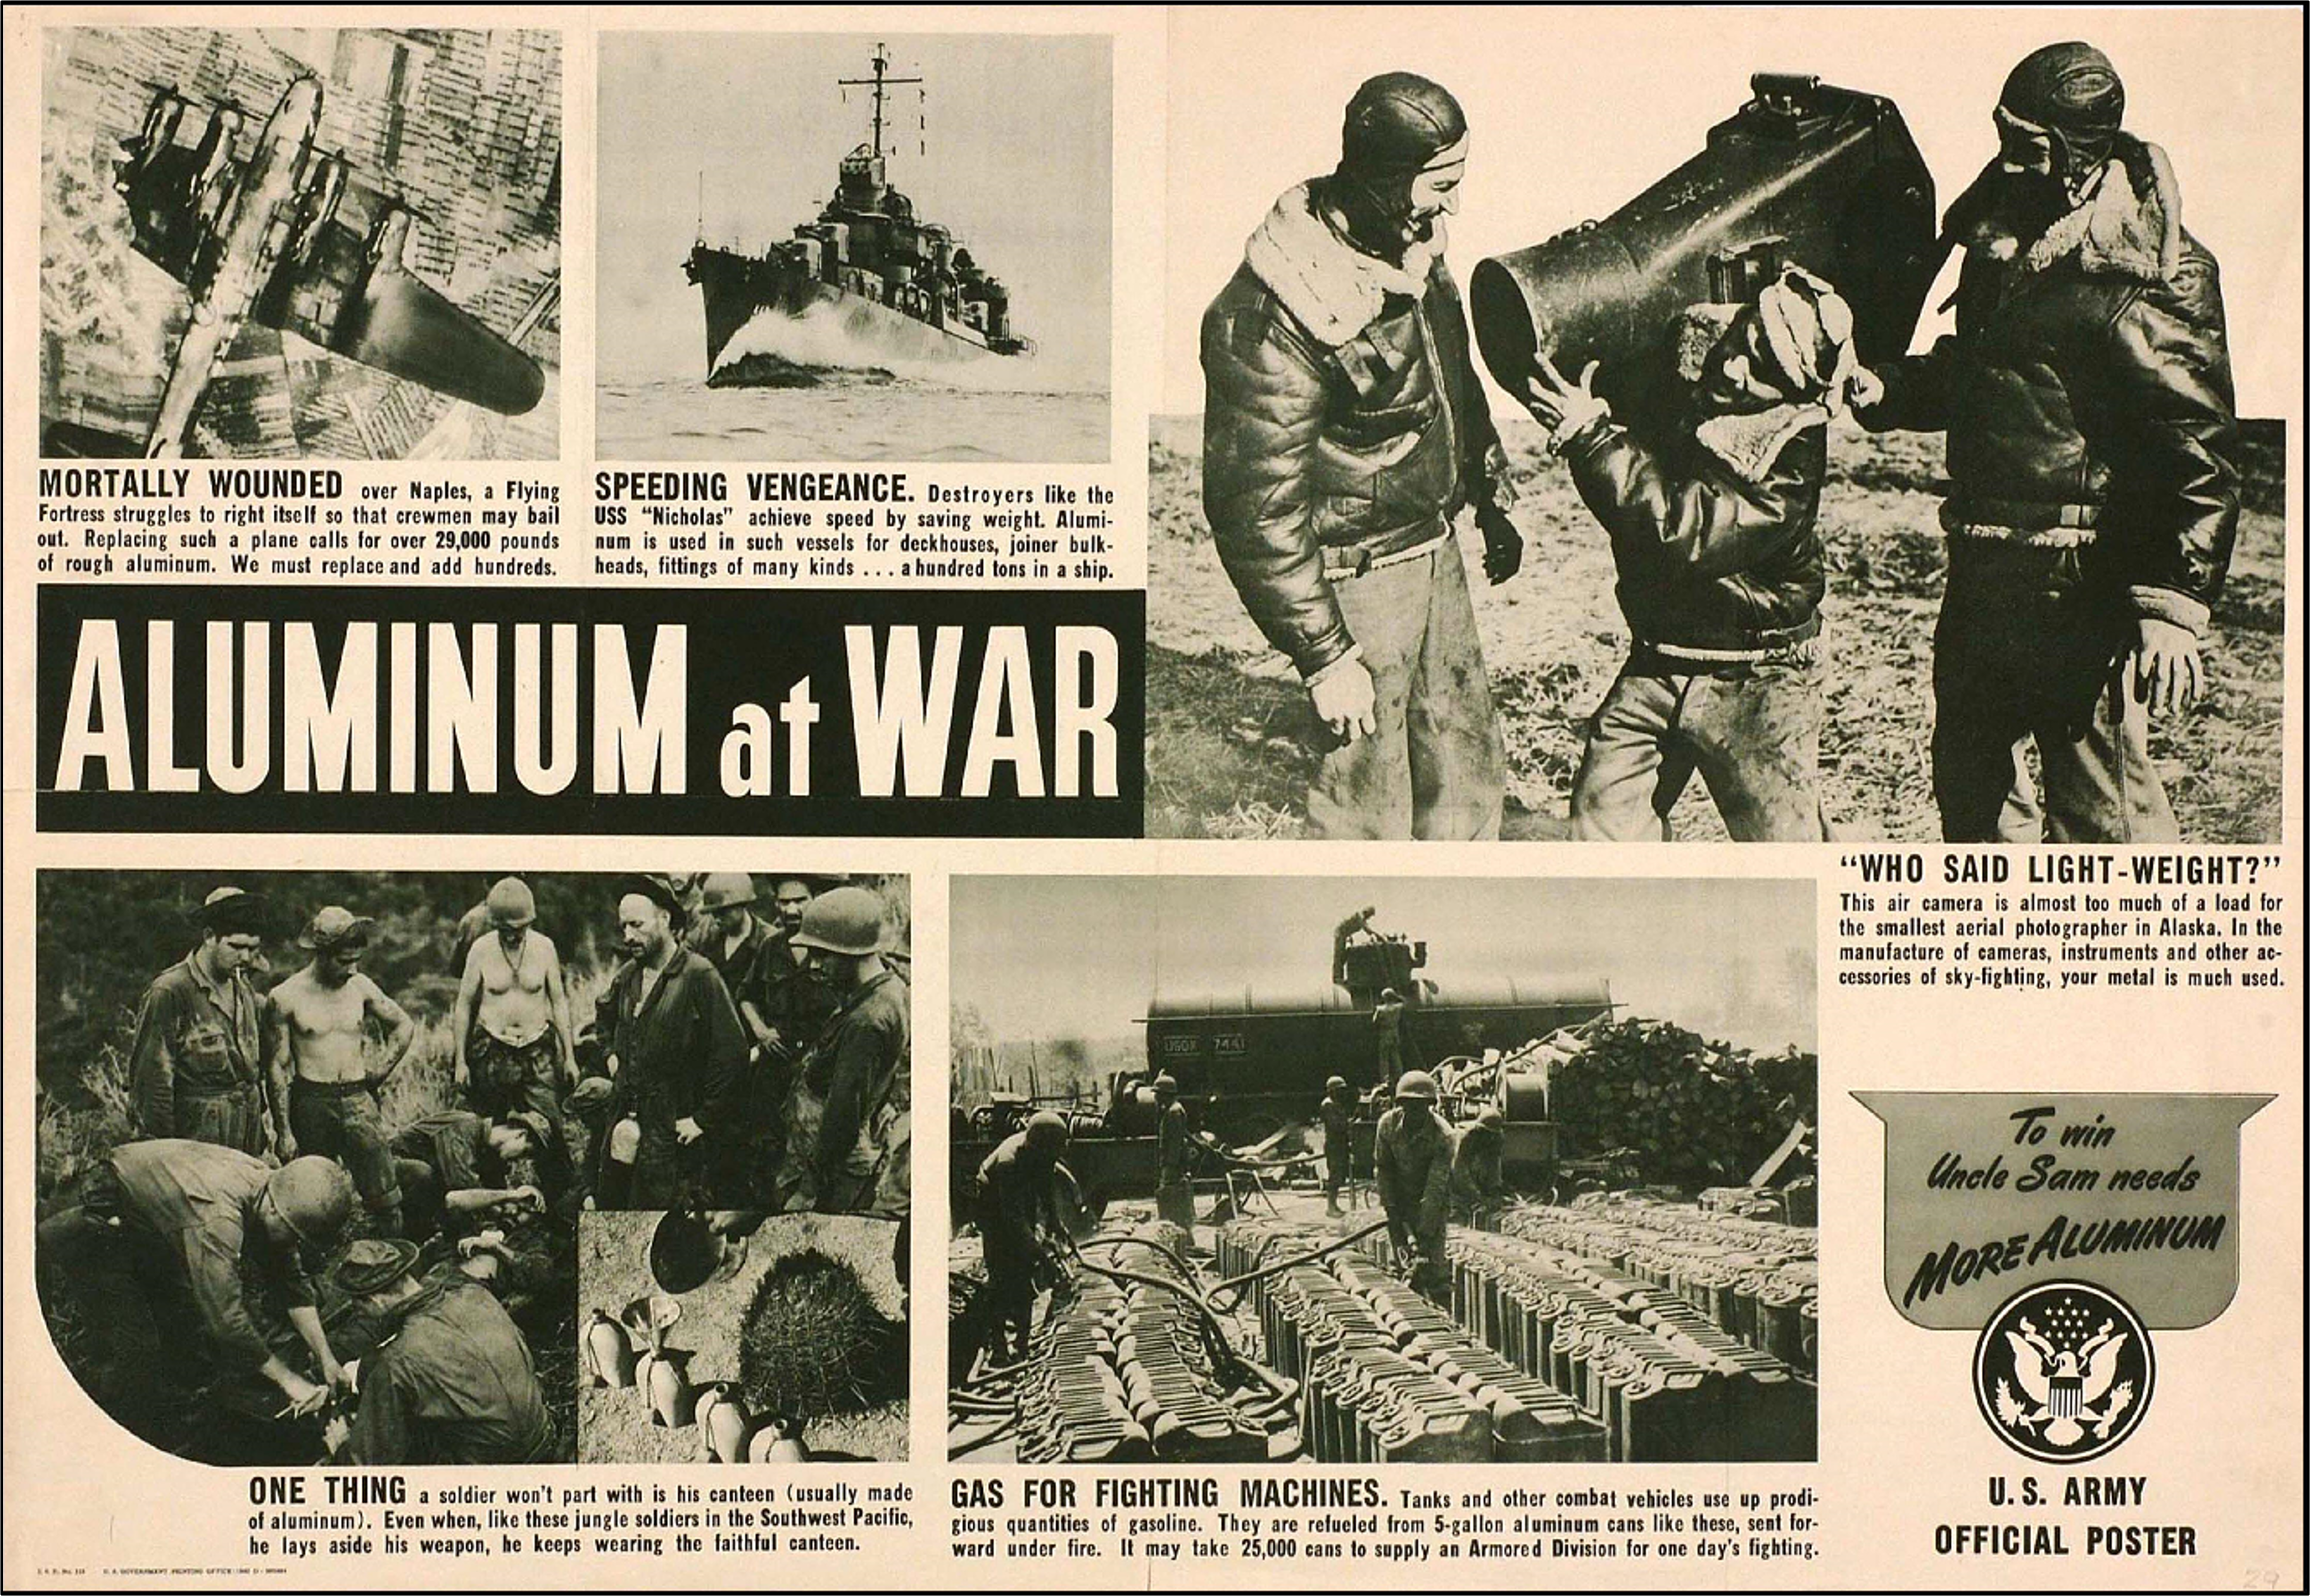 AnN old newspaper clipping talking about aluminum during the war effort of WWII